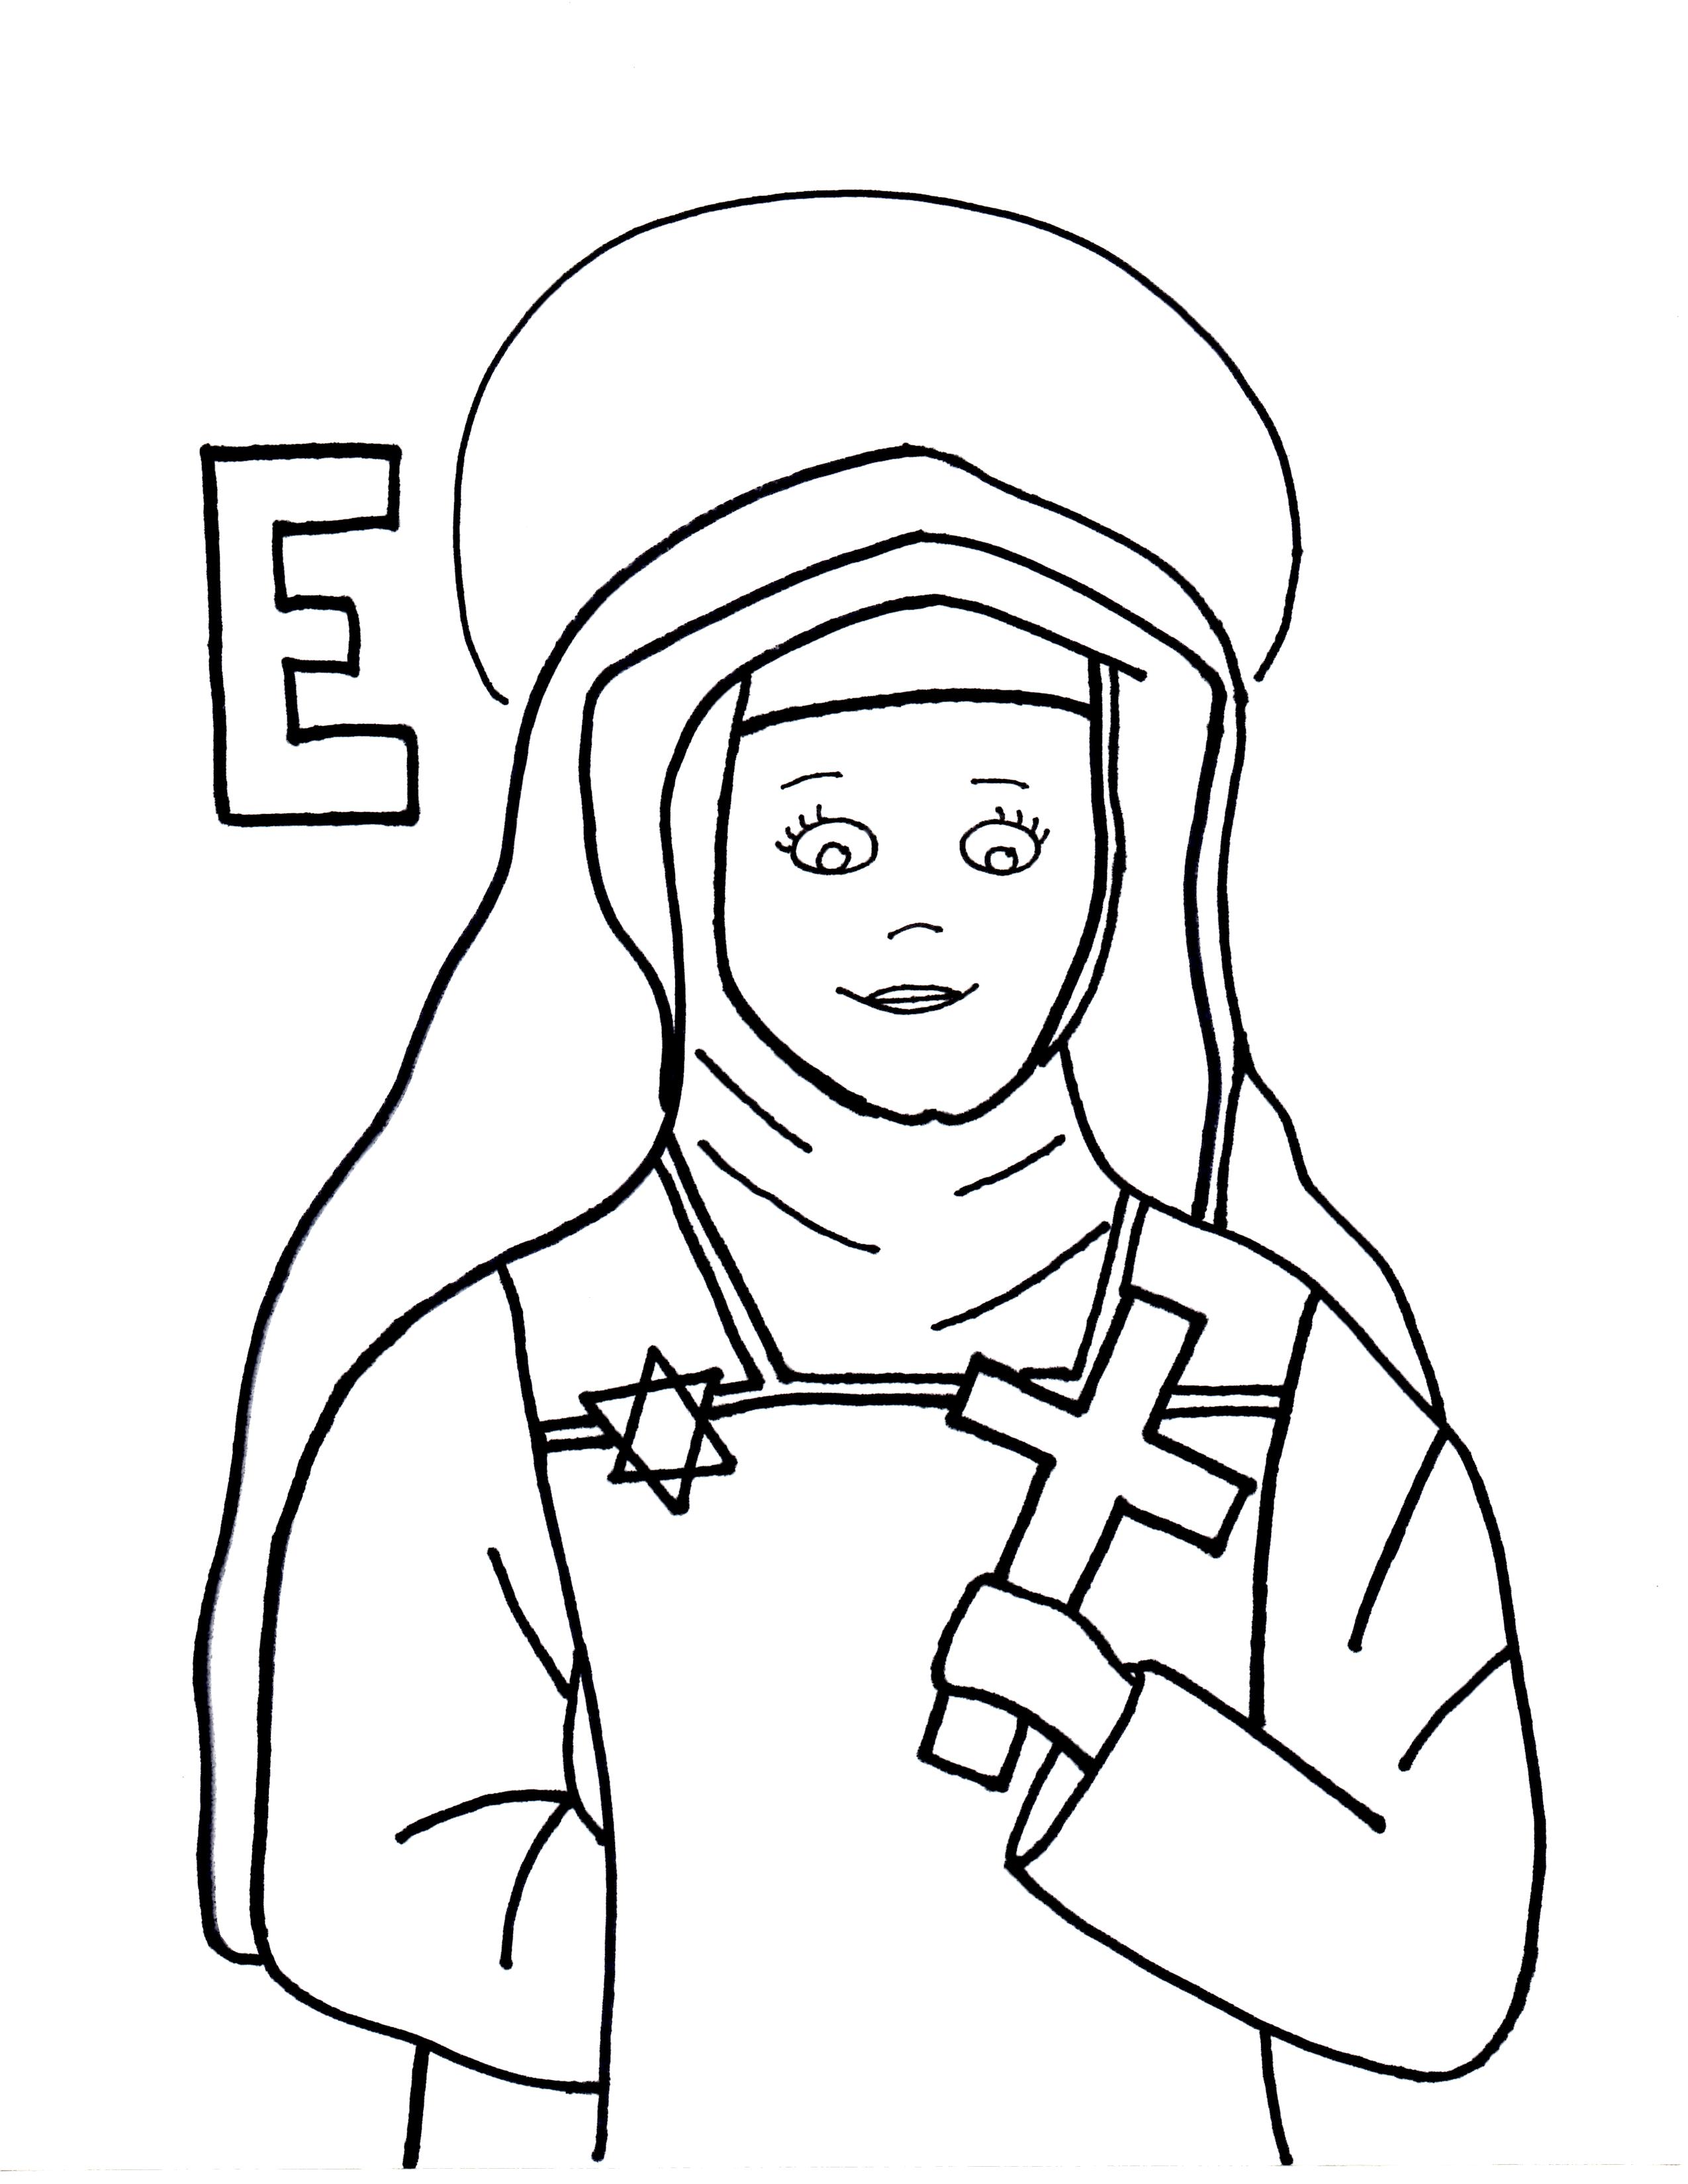 E is for st edith stein saints to color